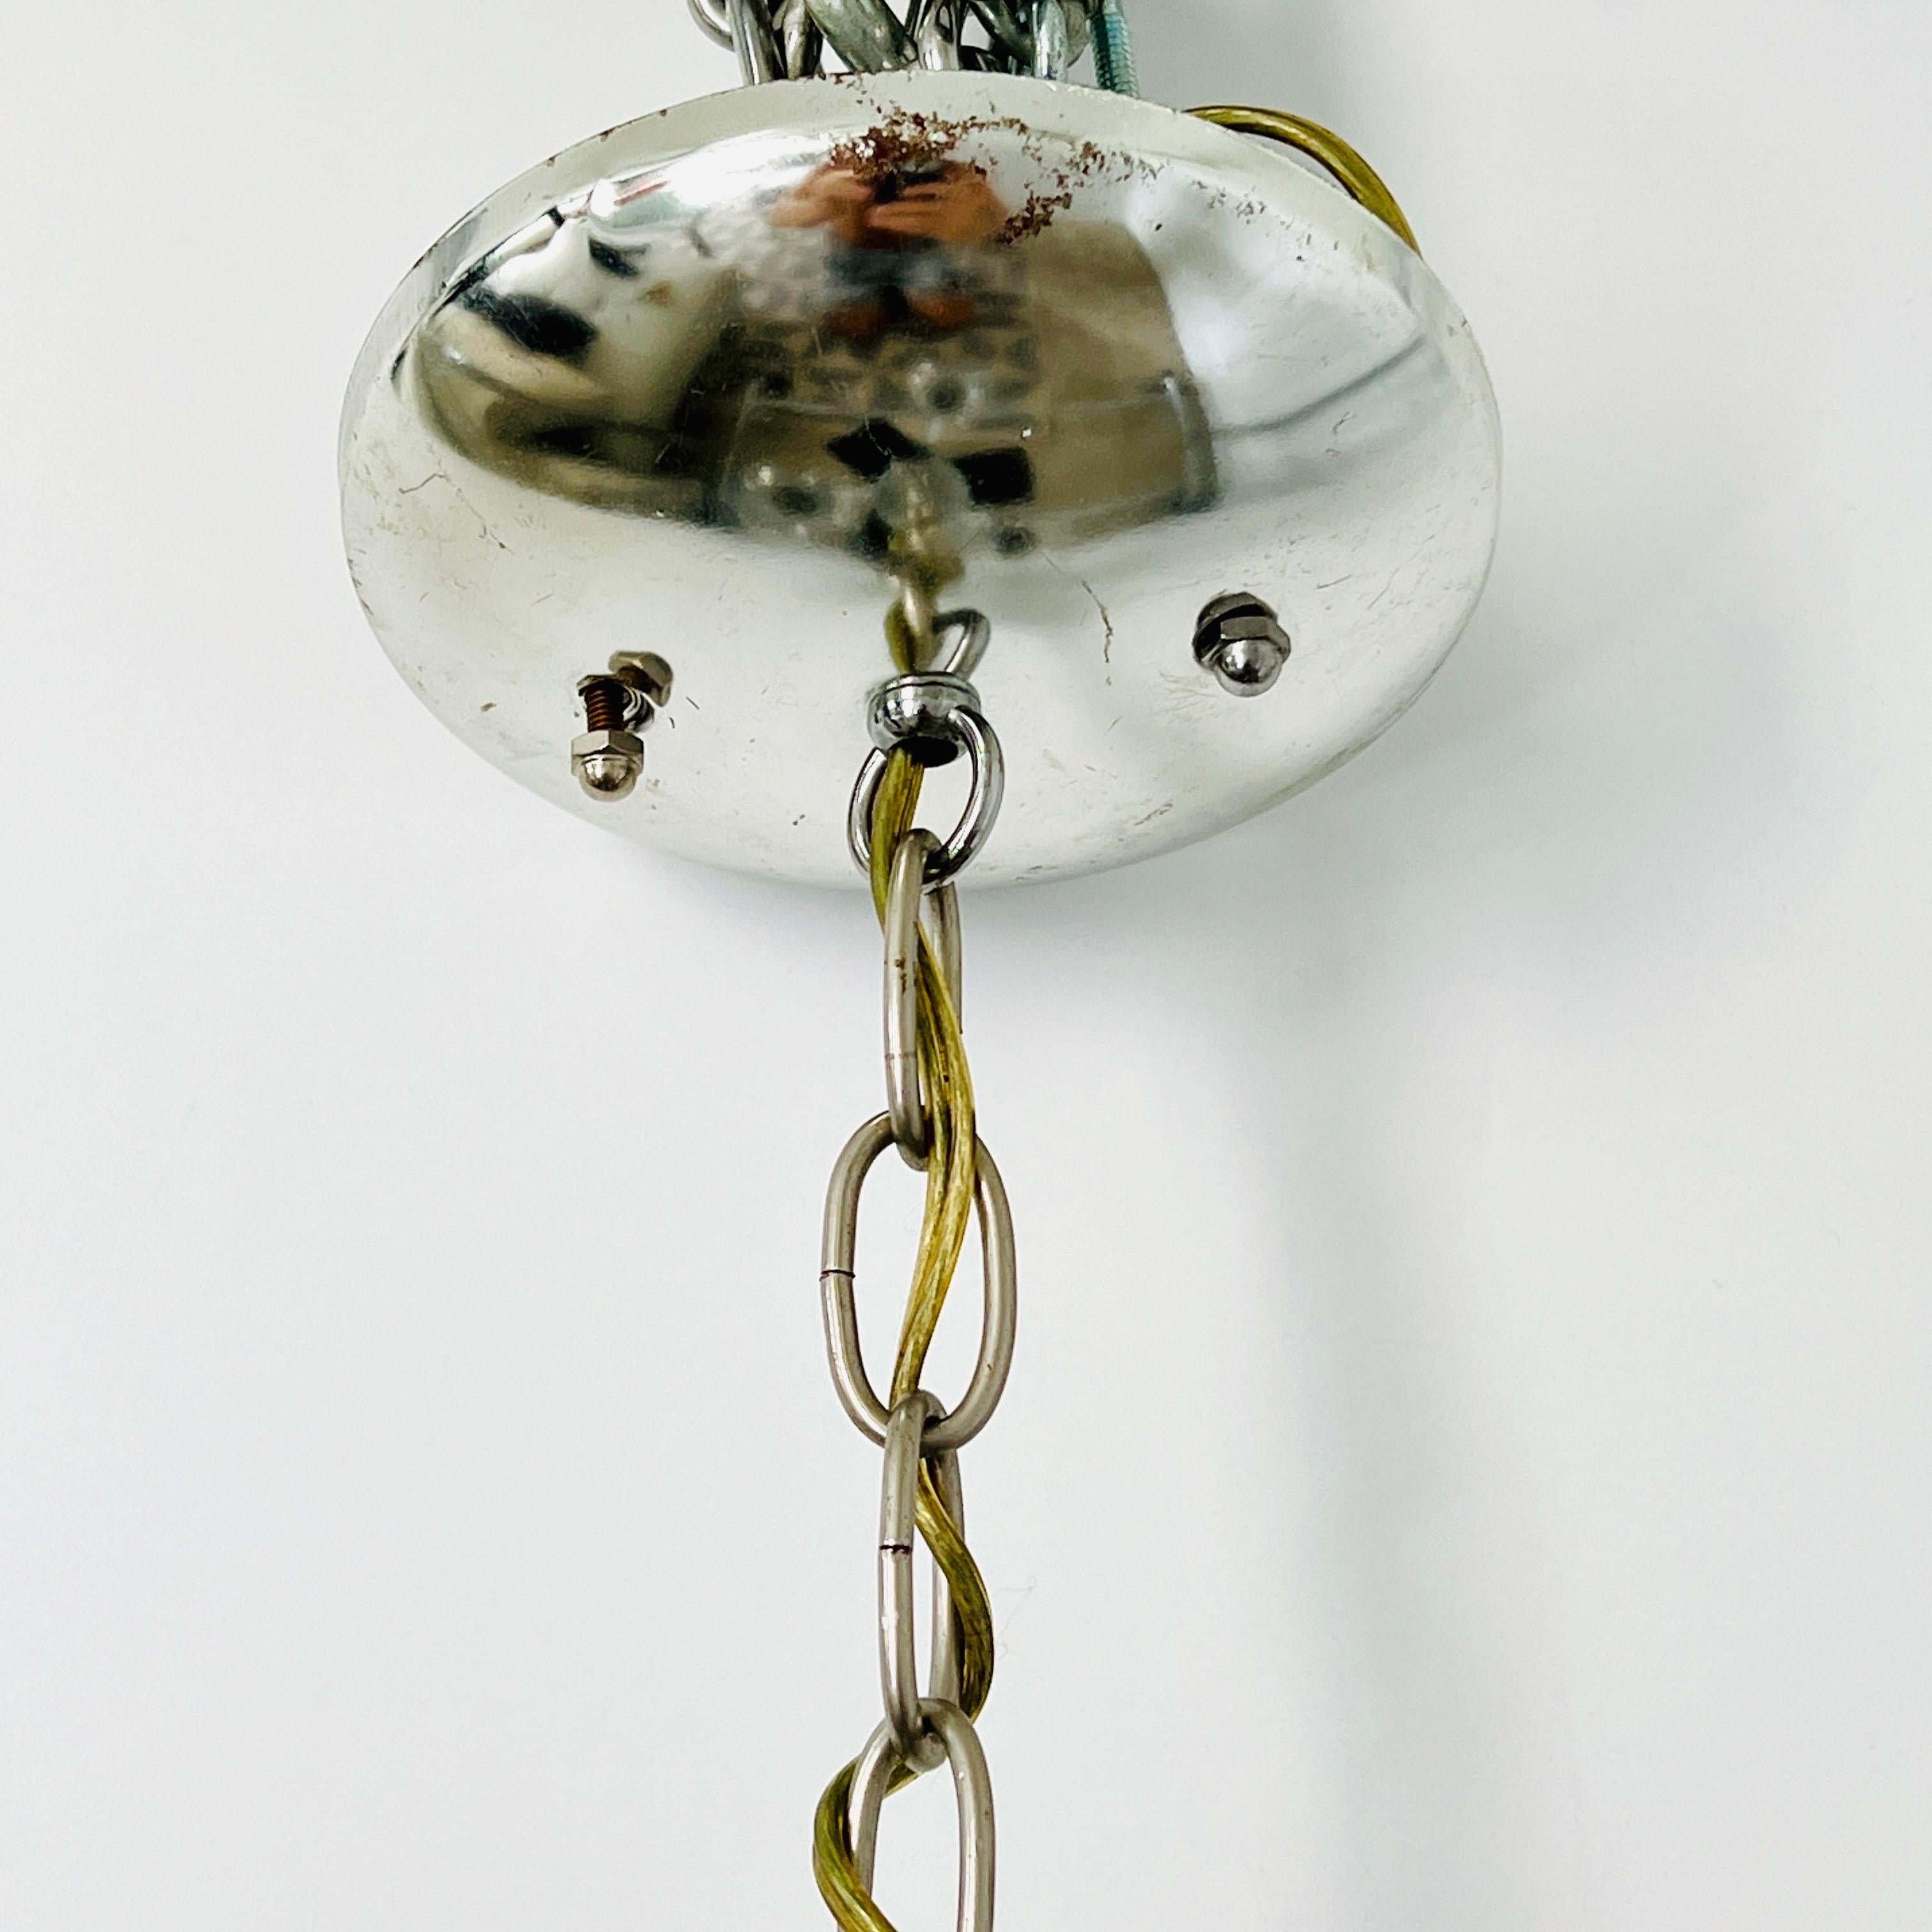 Sculptural Chandelier in Chrome and Smoked Lucite, Robert Sonneman, c. 1970's For Sale 8